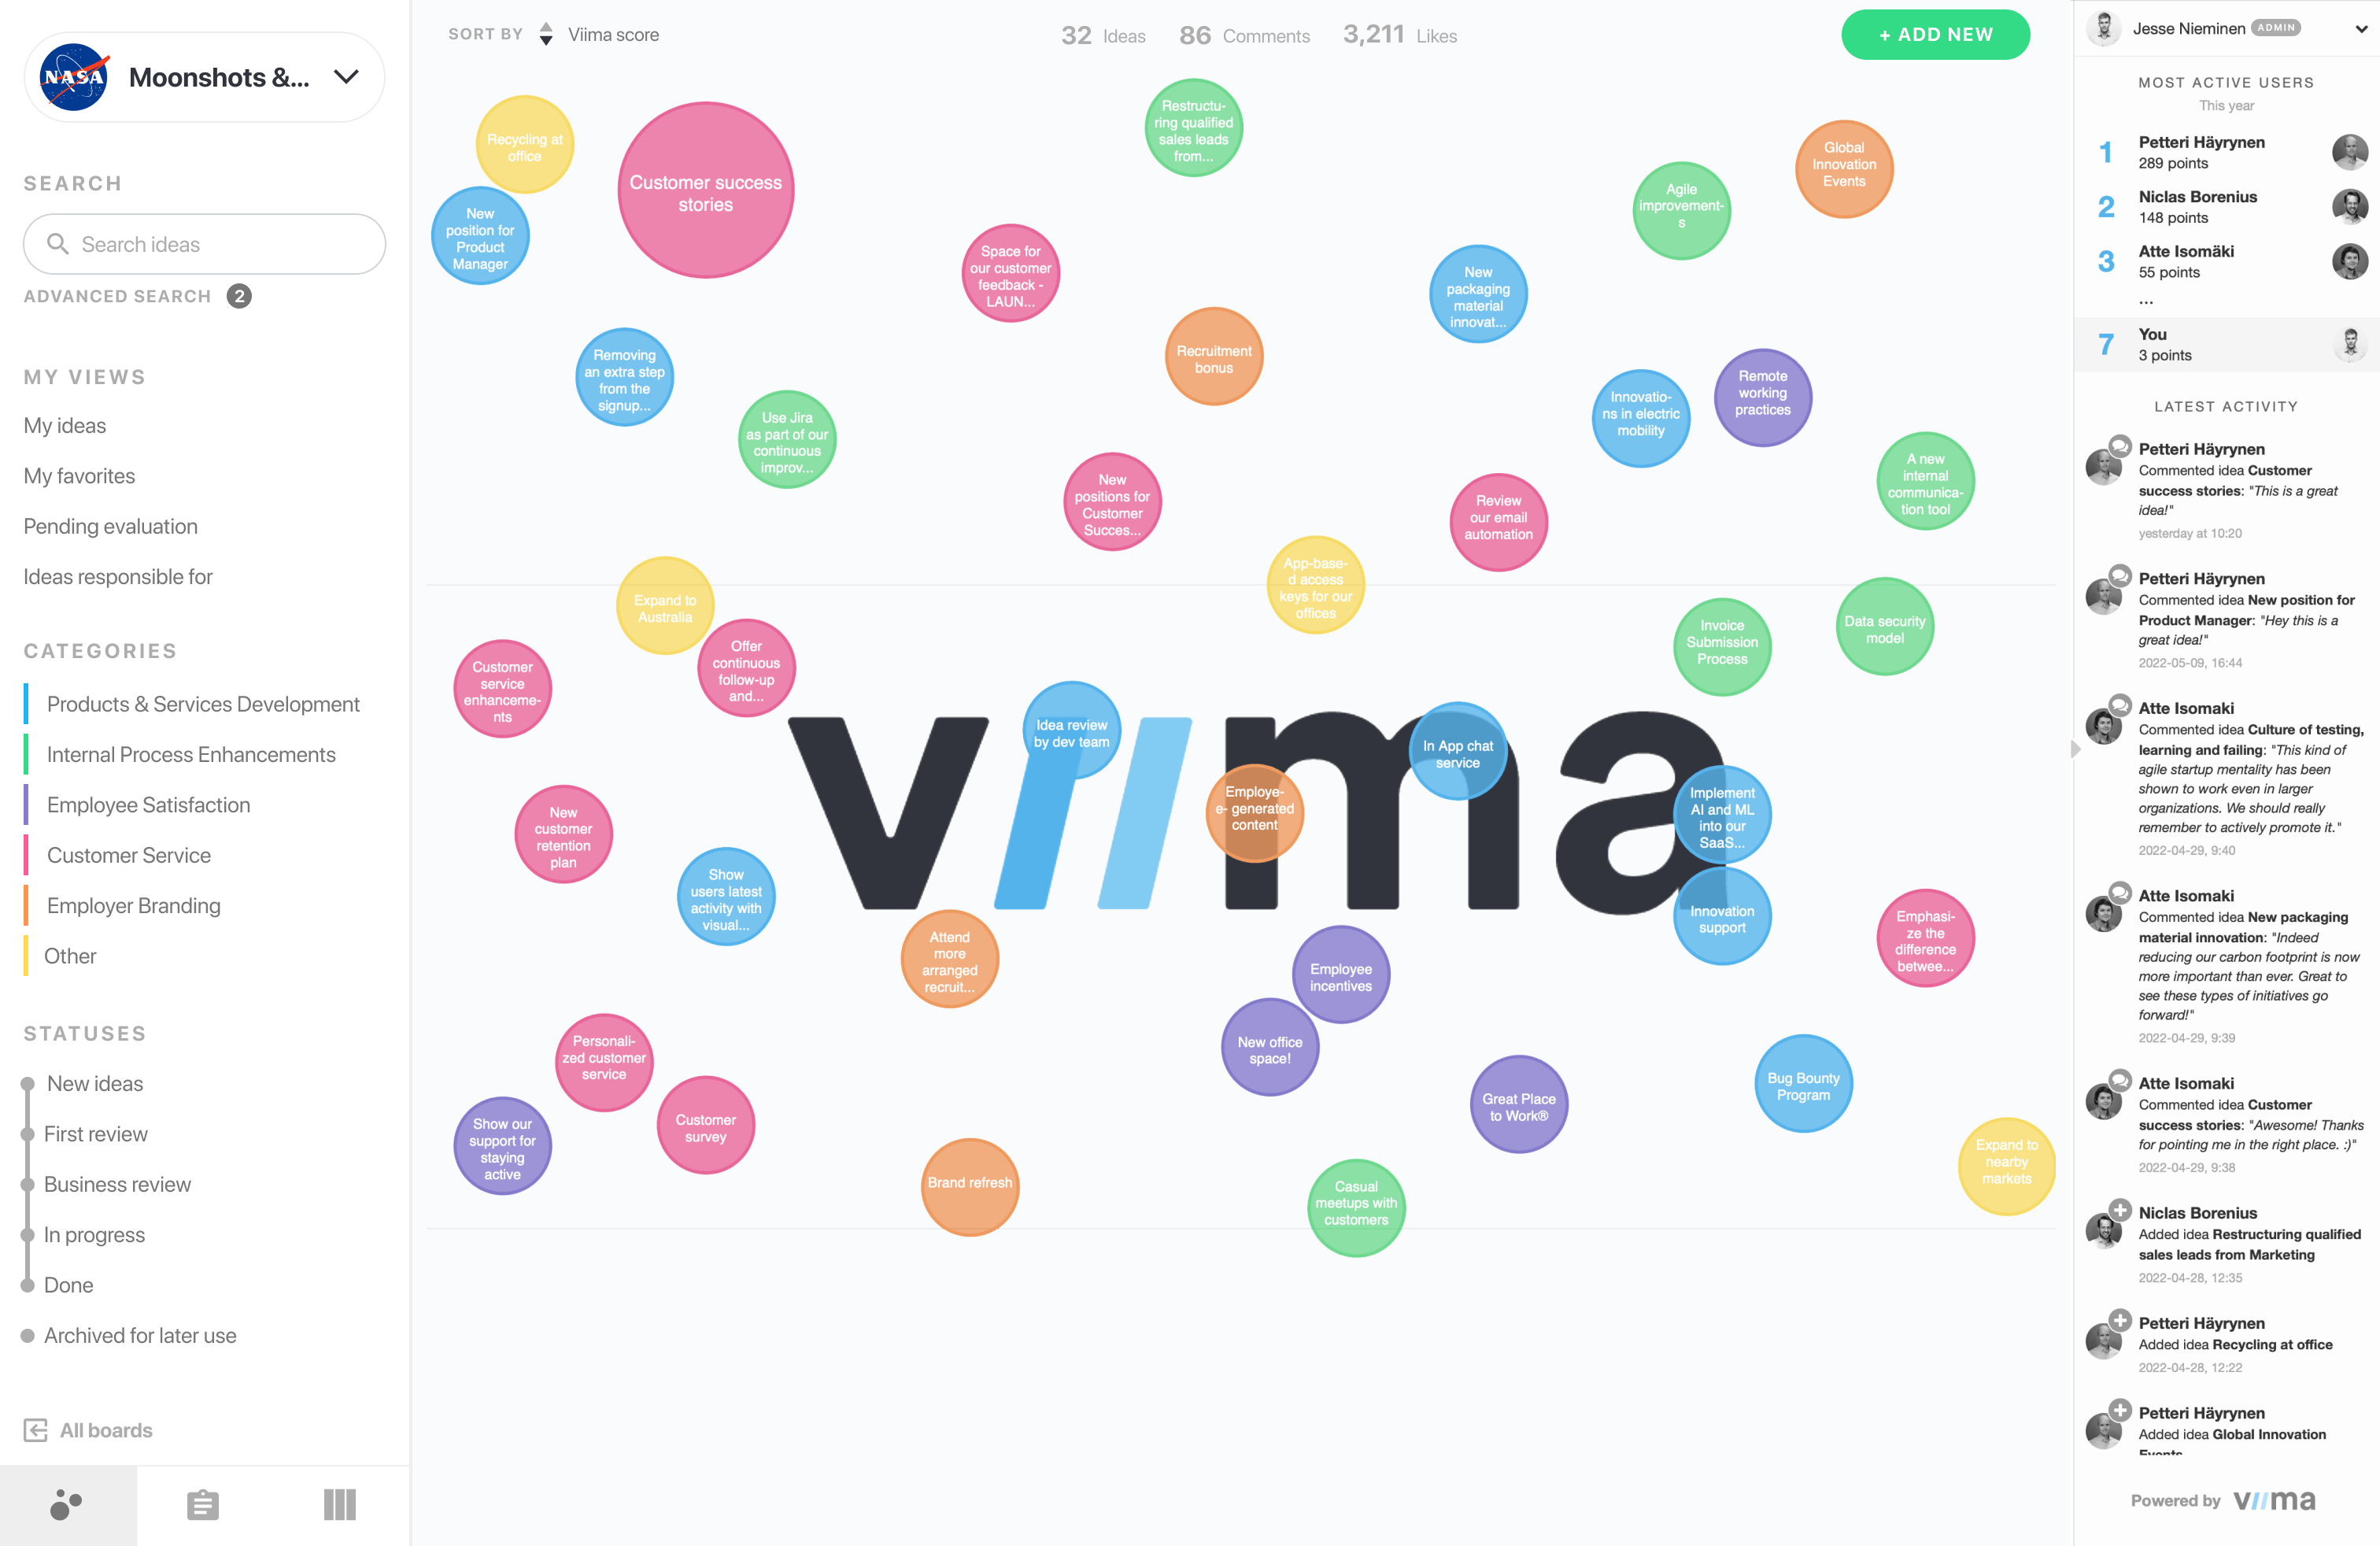 Viima shows ideas in a uniquely visual and engaging way